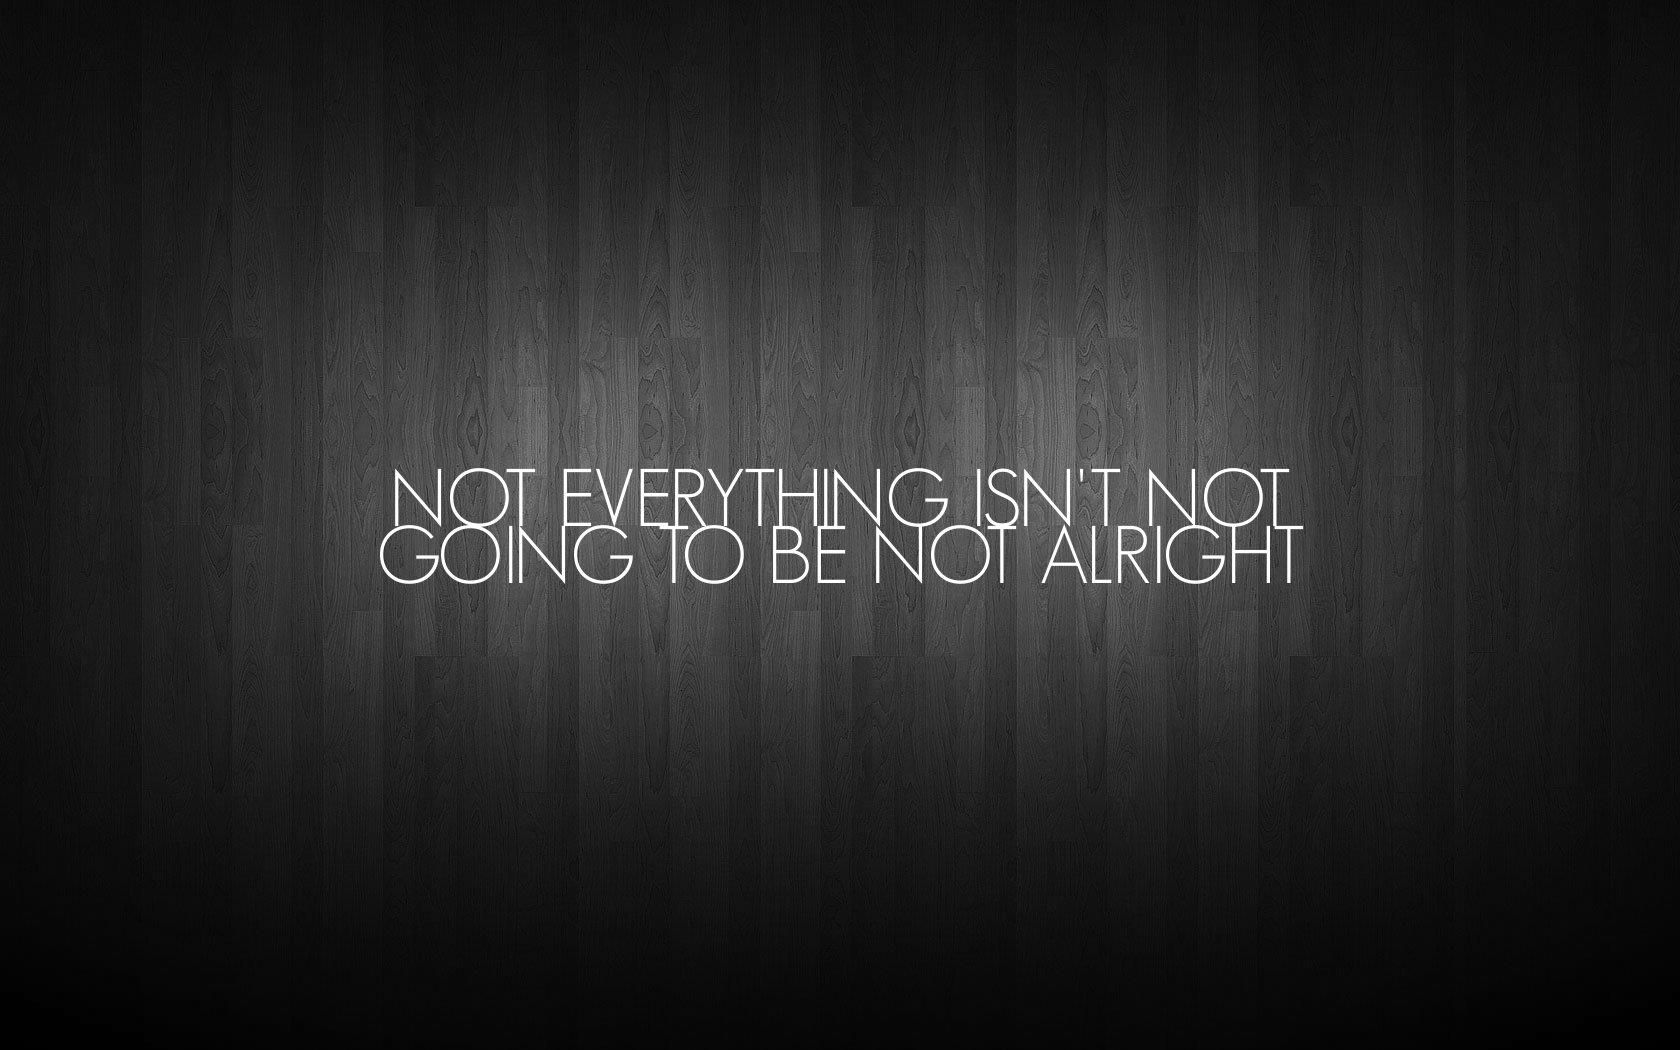 Not everything isn't not going to be not alright. Wallpaper quotes, Funny quotes wallpaper, Funny wallpaper